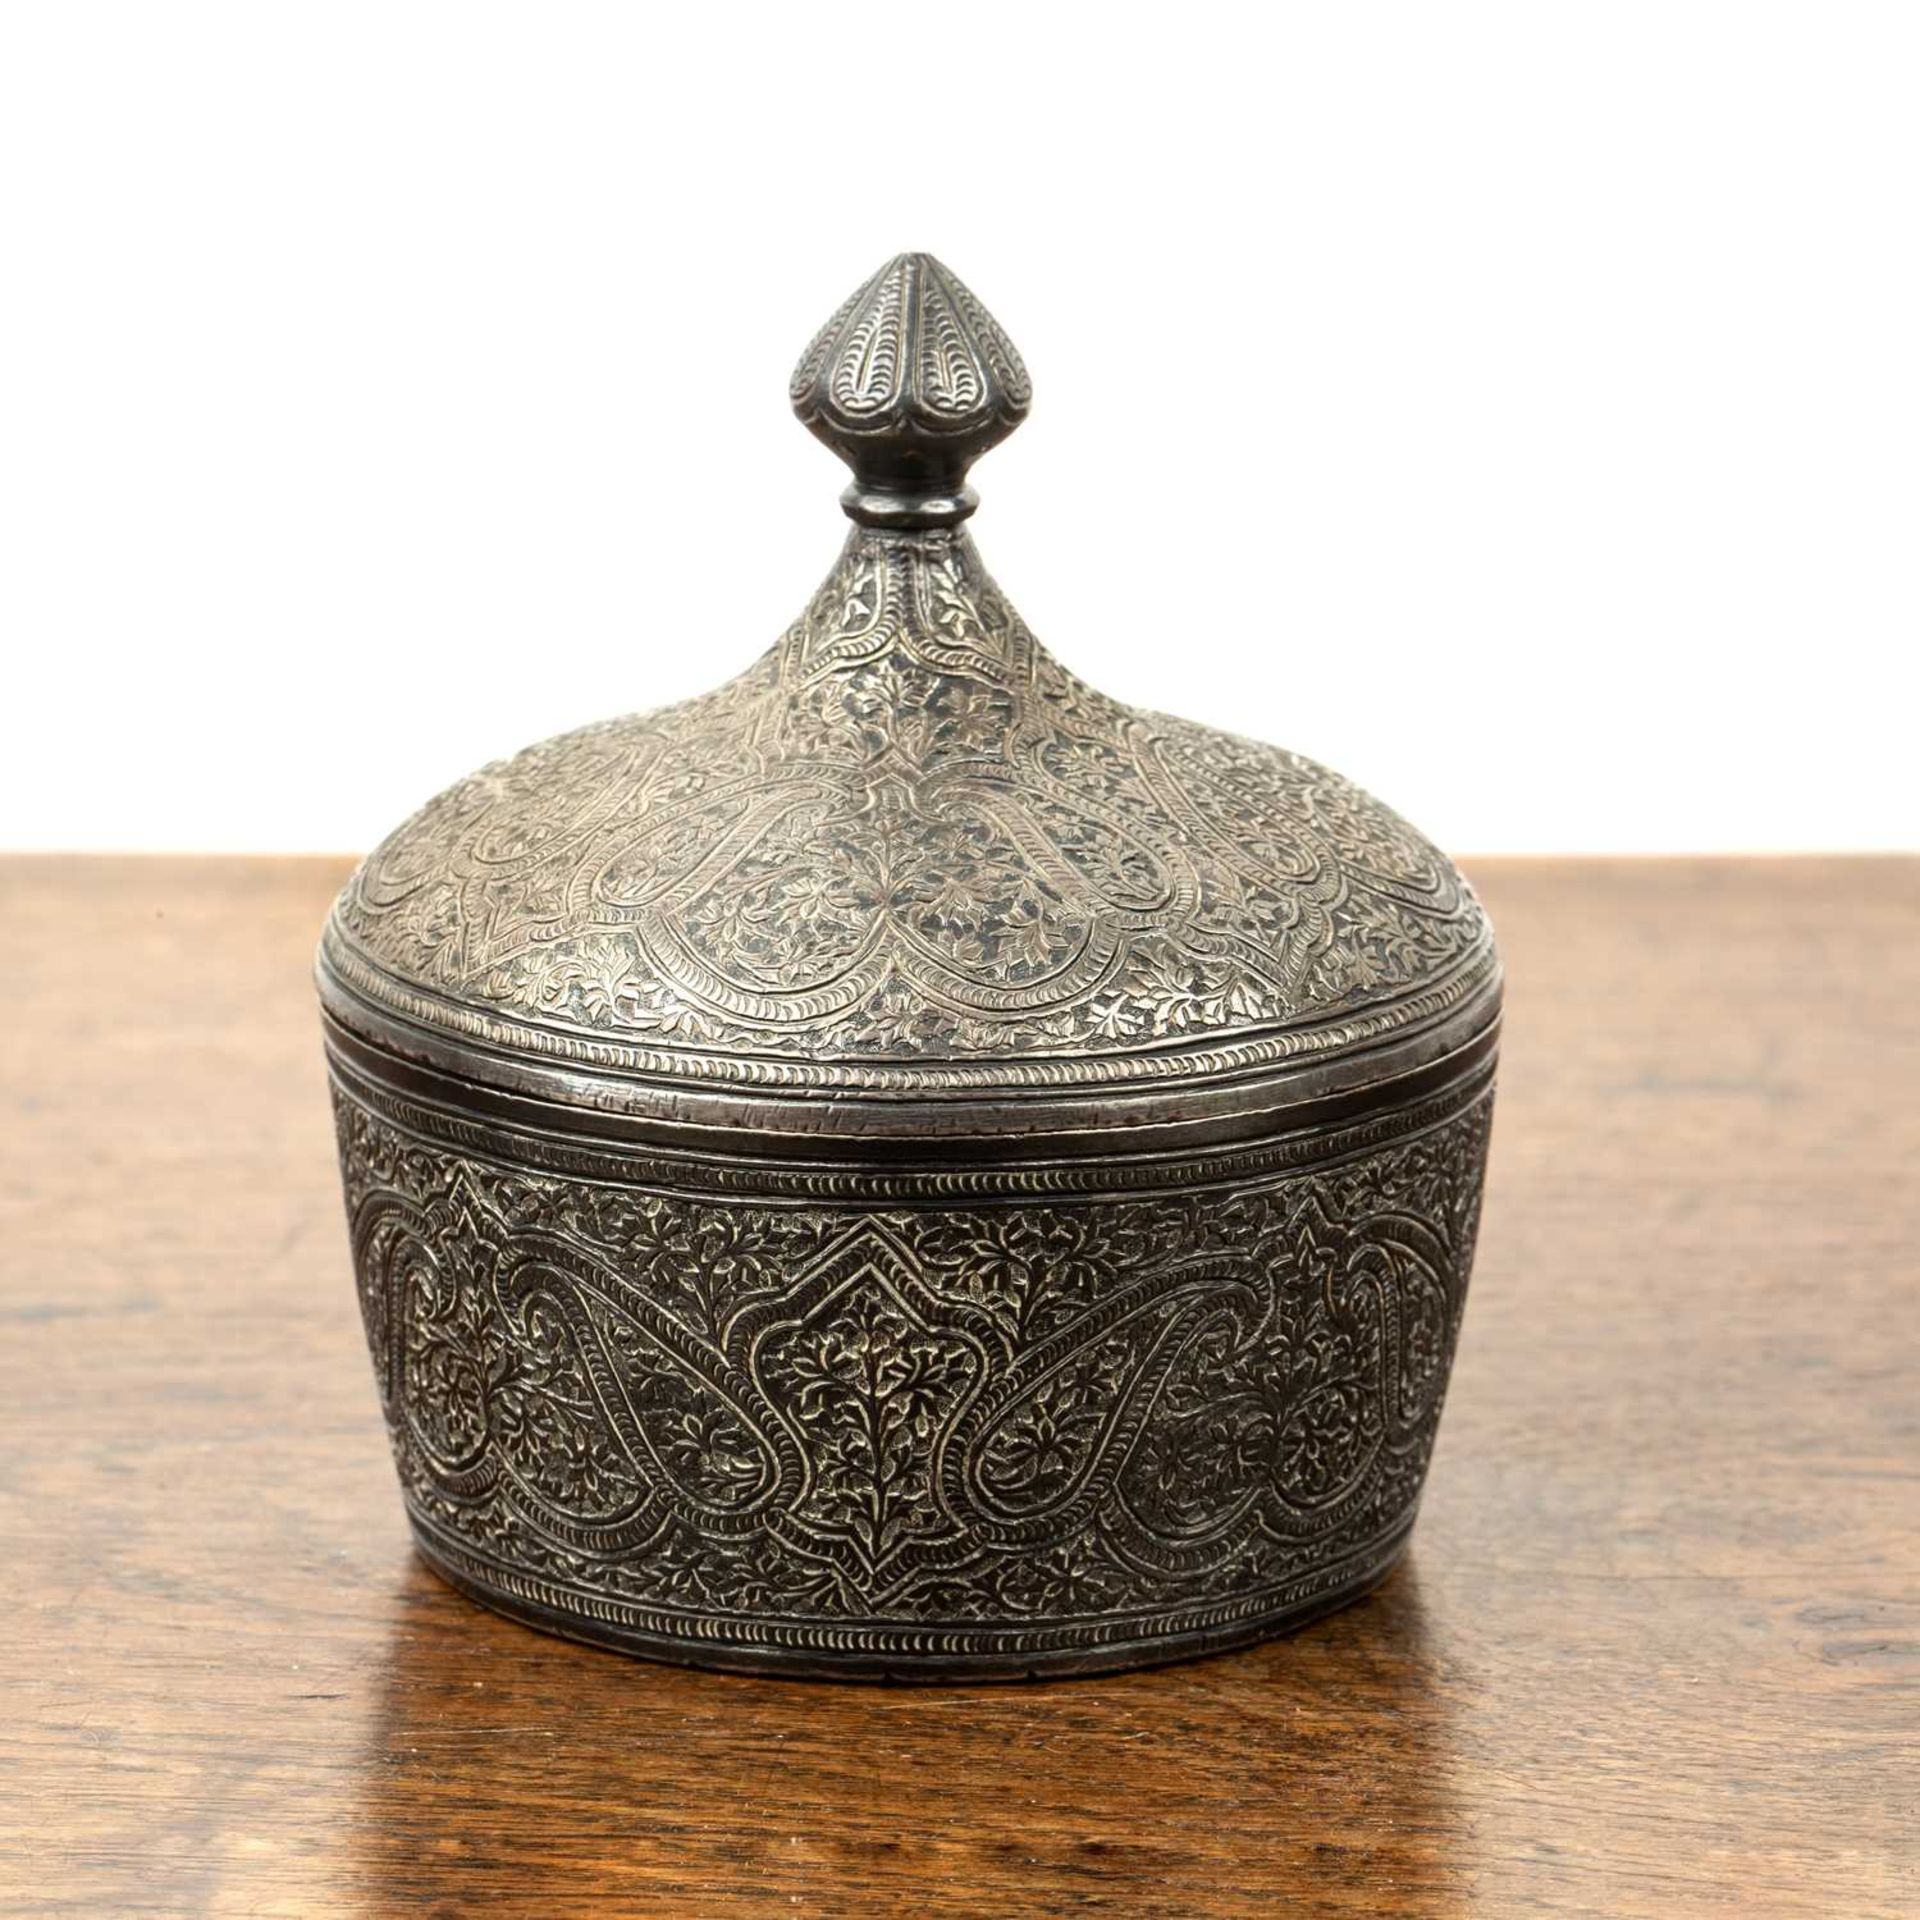 Engraved white metal small powder case and cover Indian with paisley designs, and knopped finial - Image 2 of 4